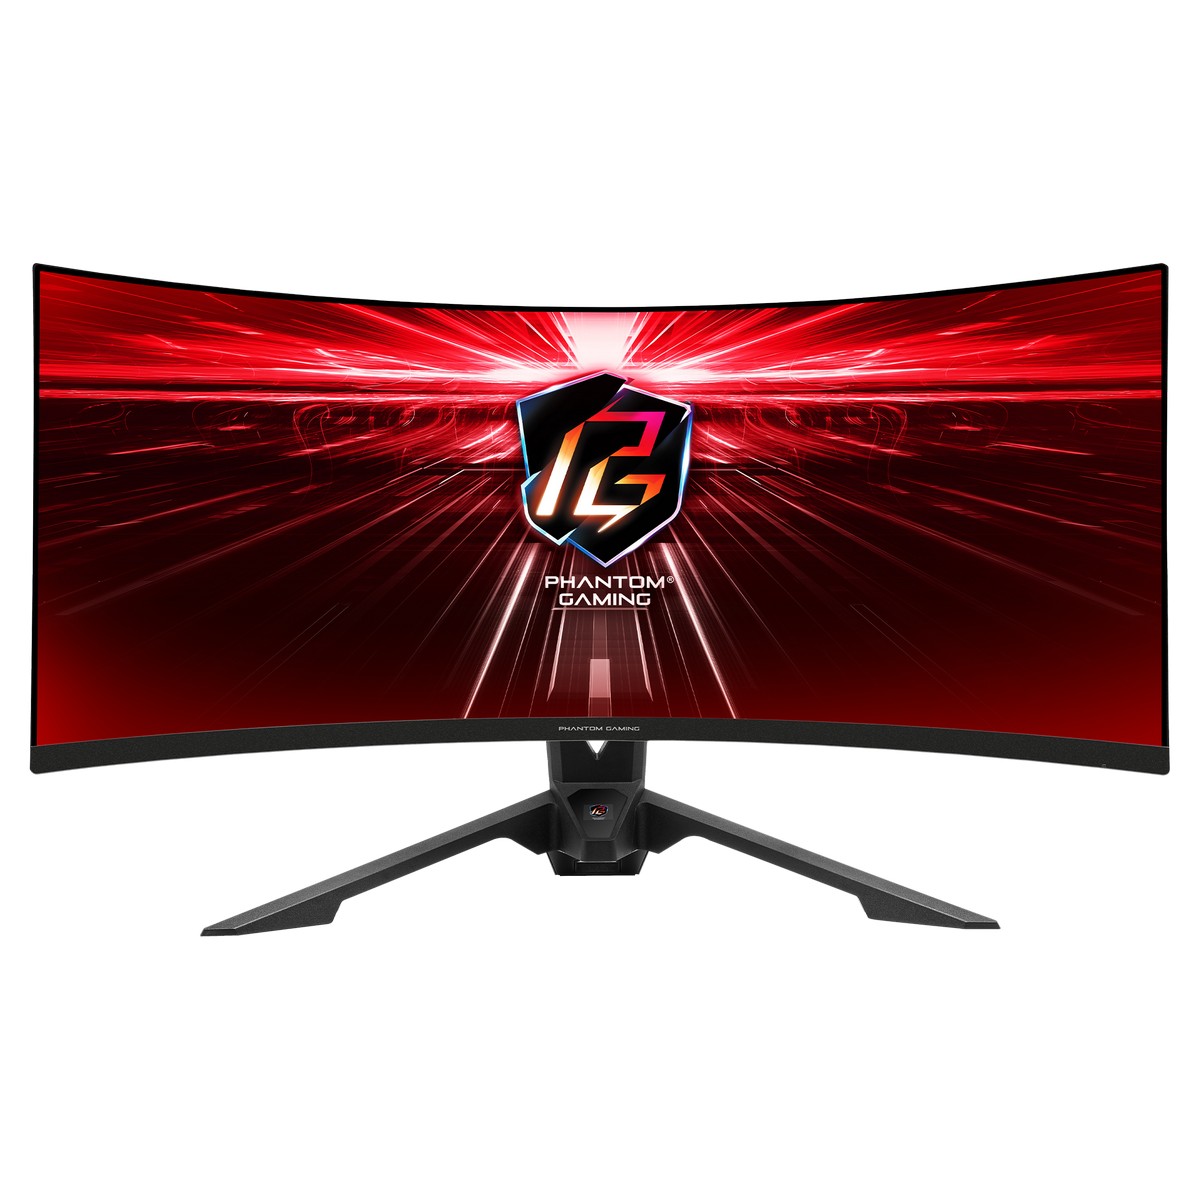 Asrock 34" PG34WQ15R3A 3440x1440 VA 165Hz 1ms FreeSync HDR 400 Ultrawide Curved Gaming Monitor